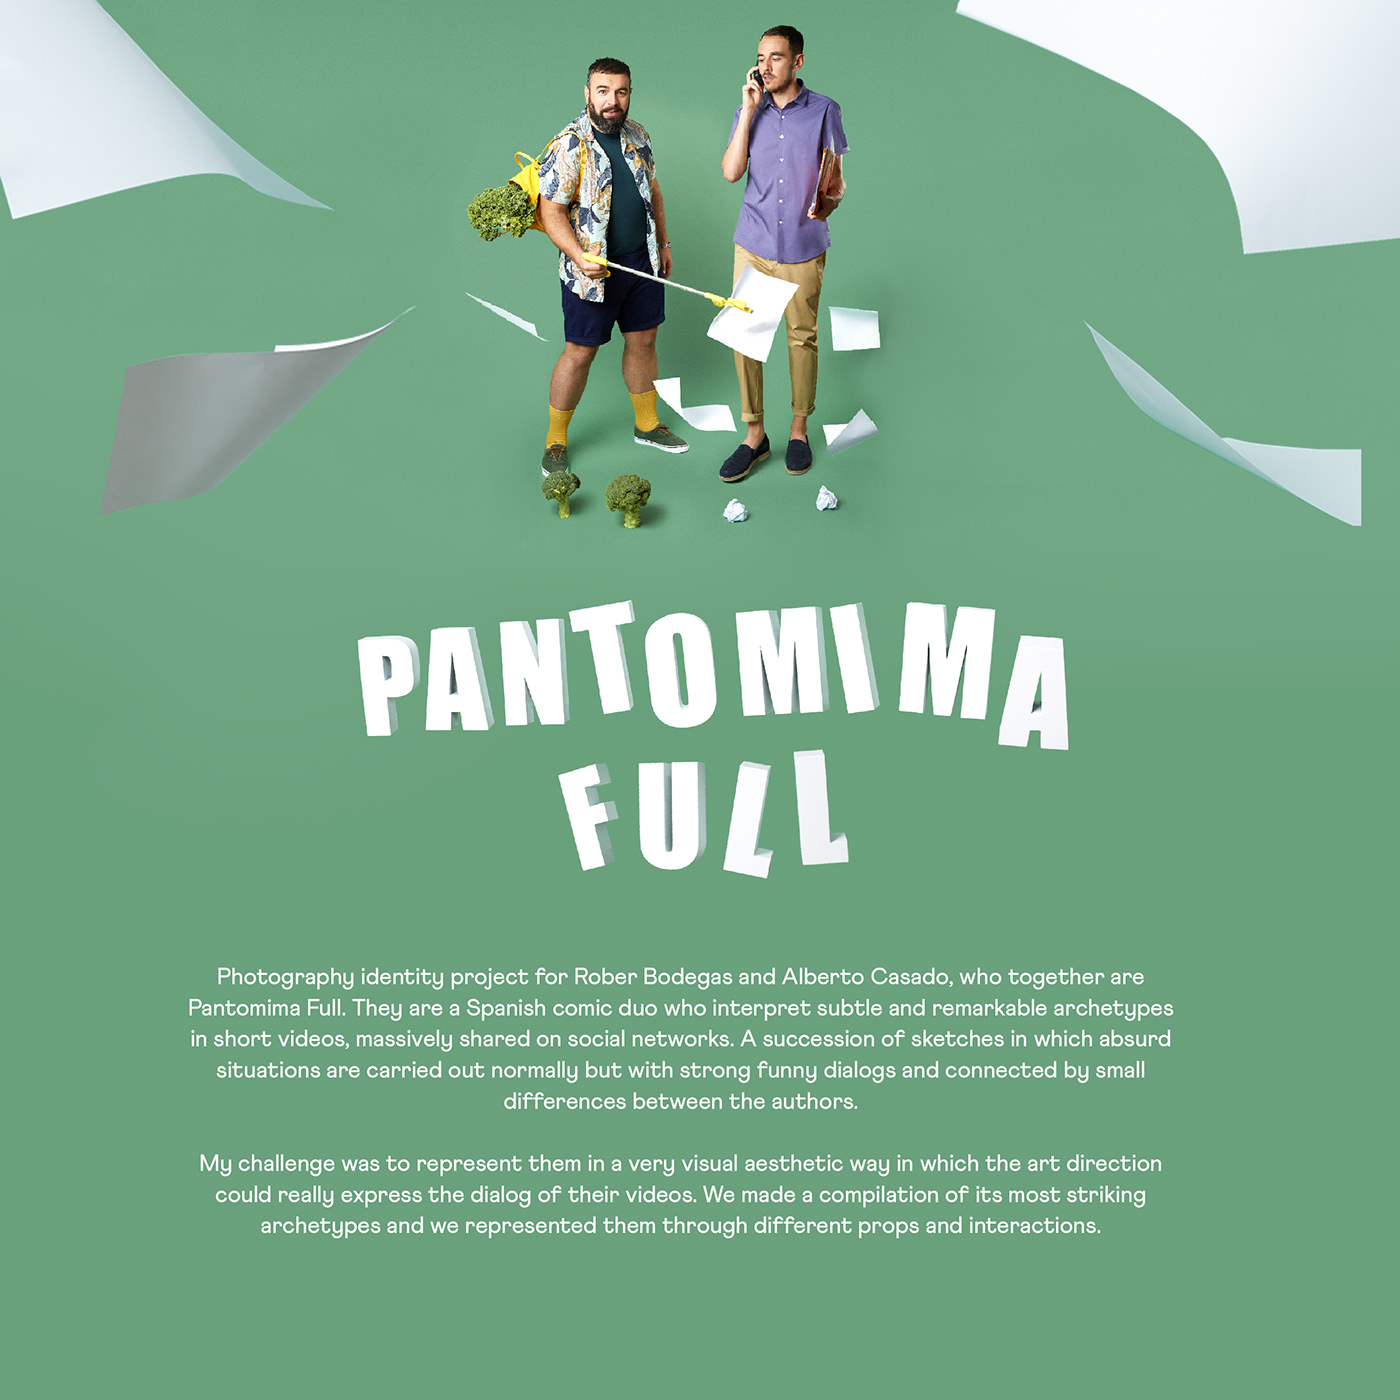 pantomimafull ArtDirection colourfull editorial identity portrait graphicphotography pastelcolors Creative Direction  still life